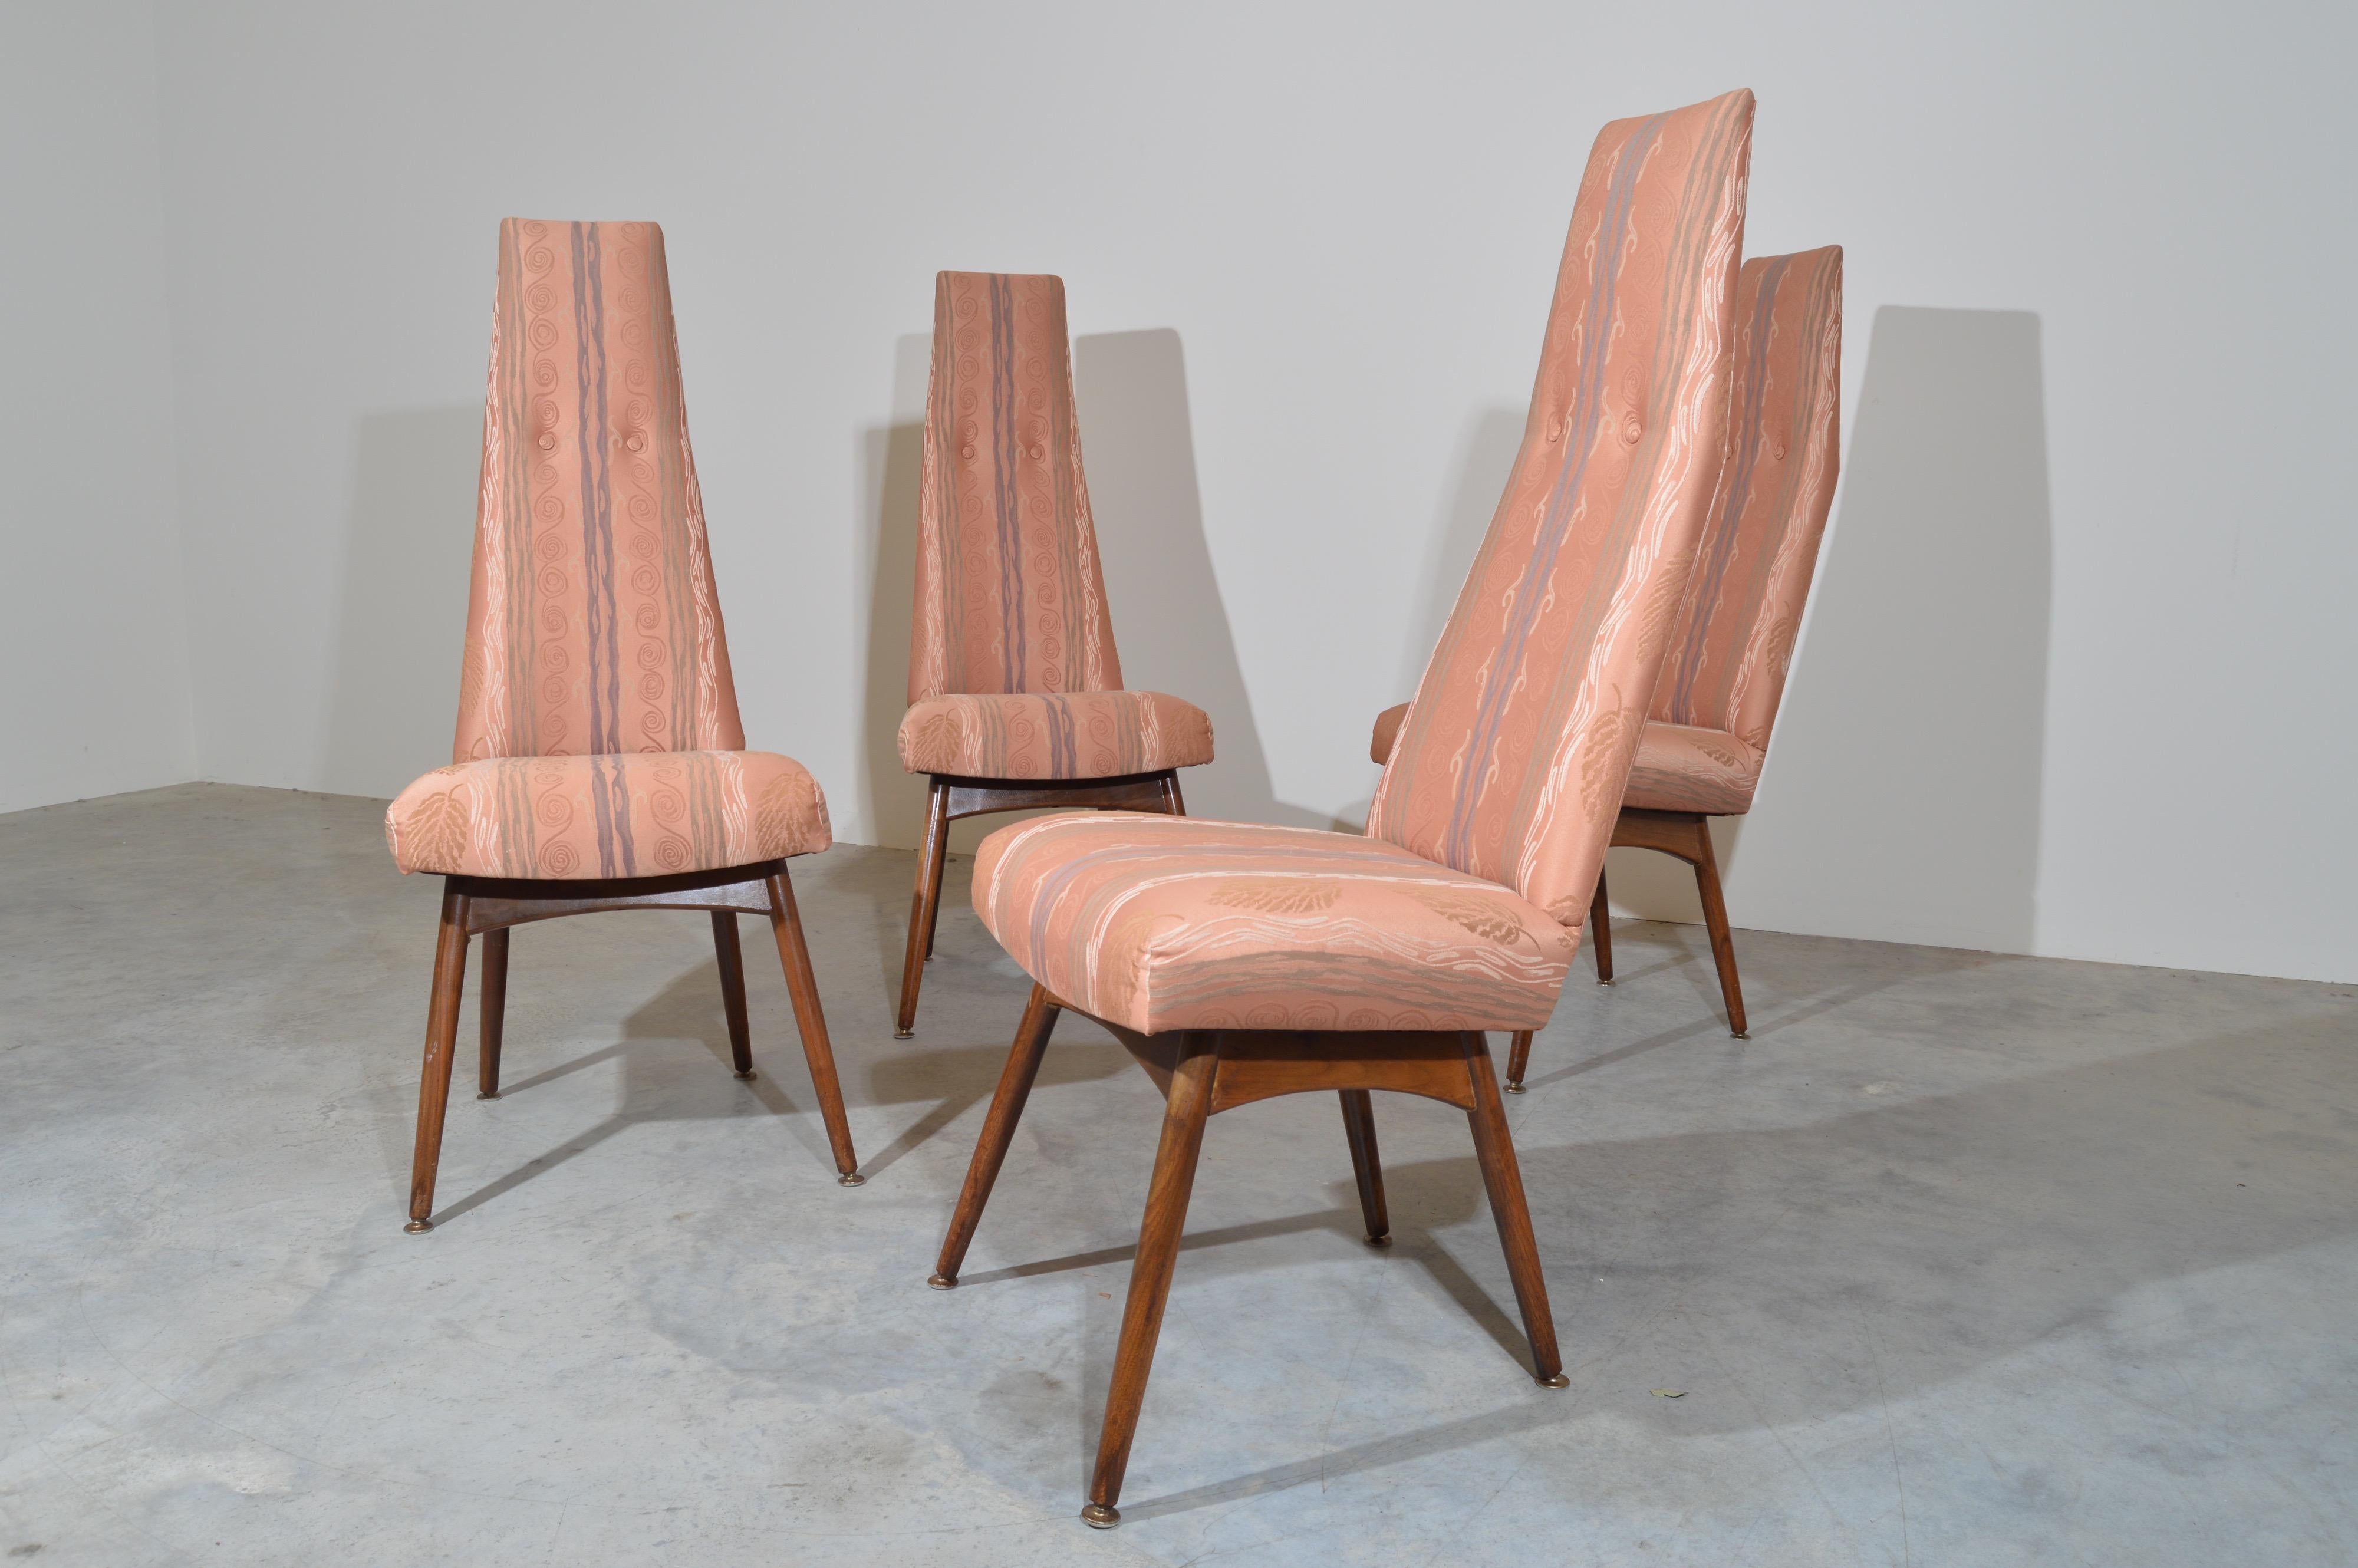 A set of 4 original Adrian Pearsall dining chairs having highback seats over walnut frames circa 1960. 
 Chairs are in good, solid condition and are ready for use.